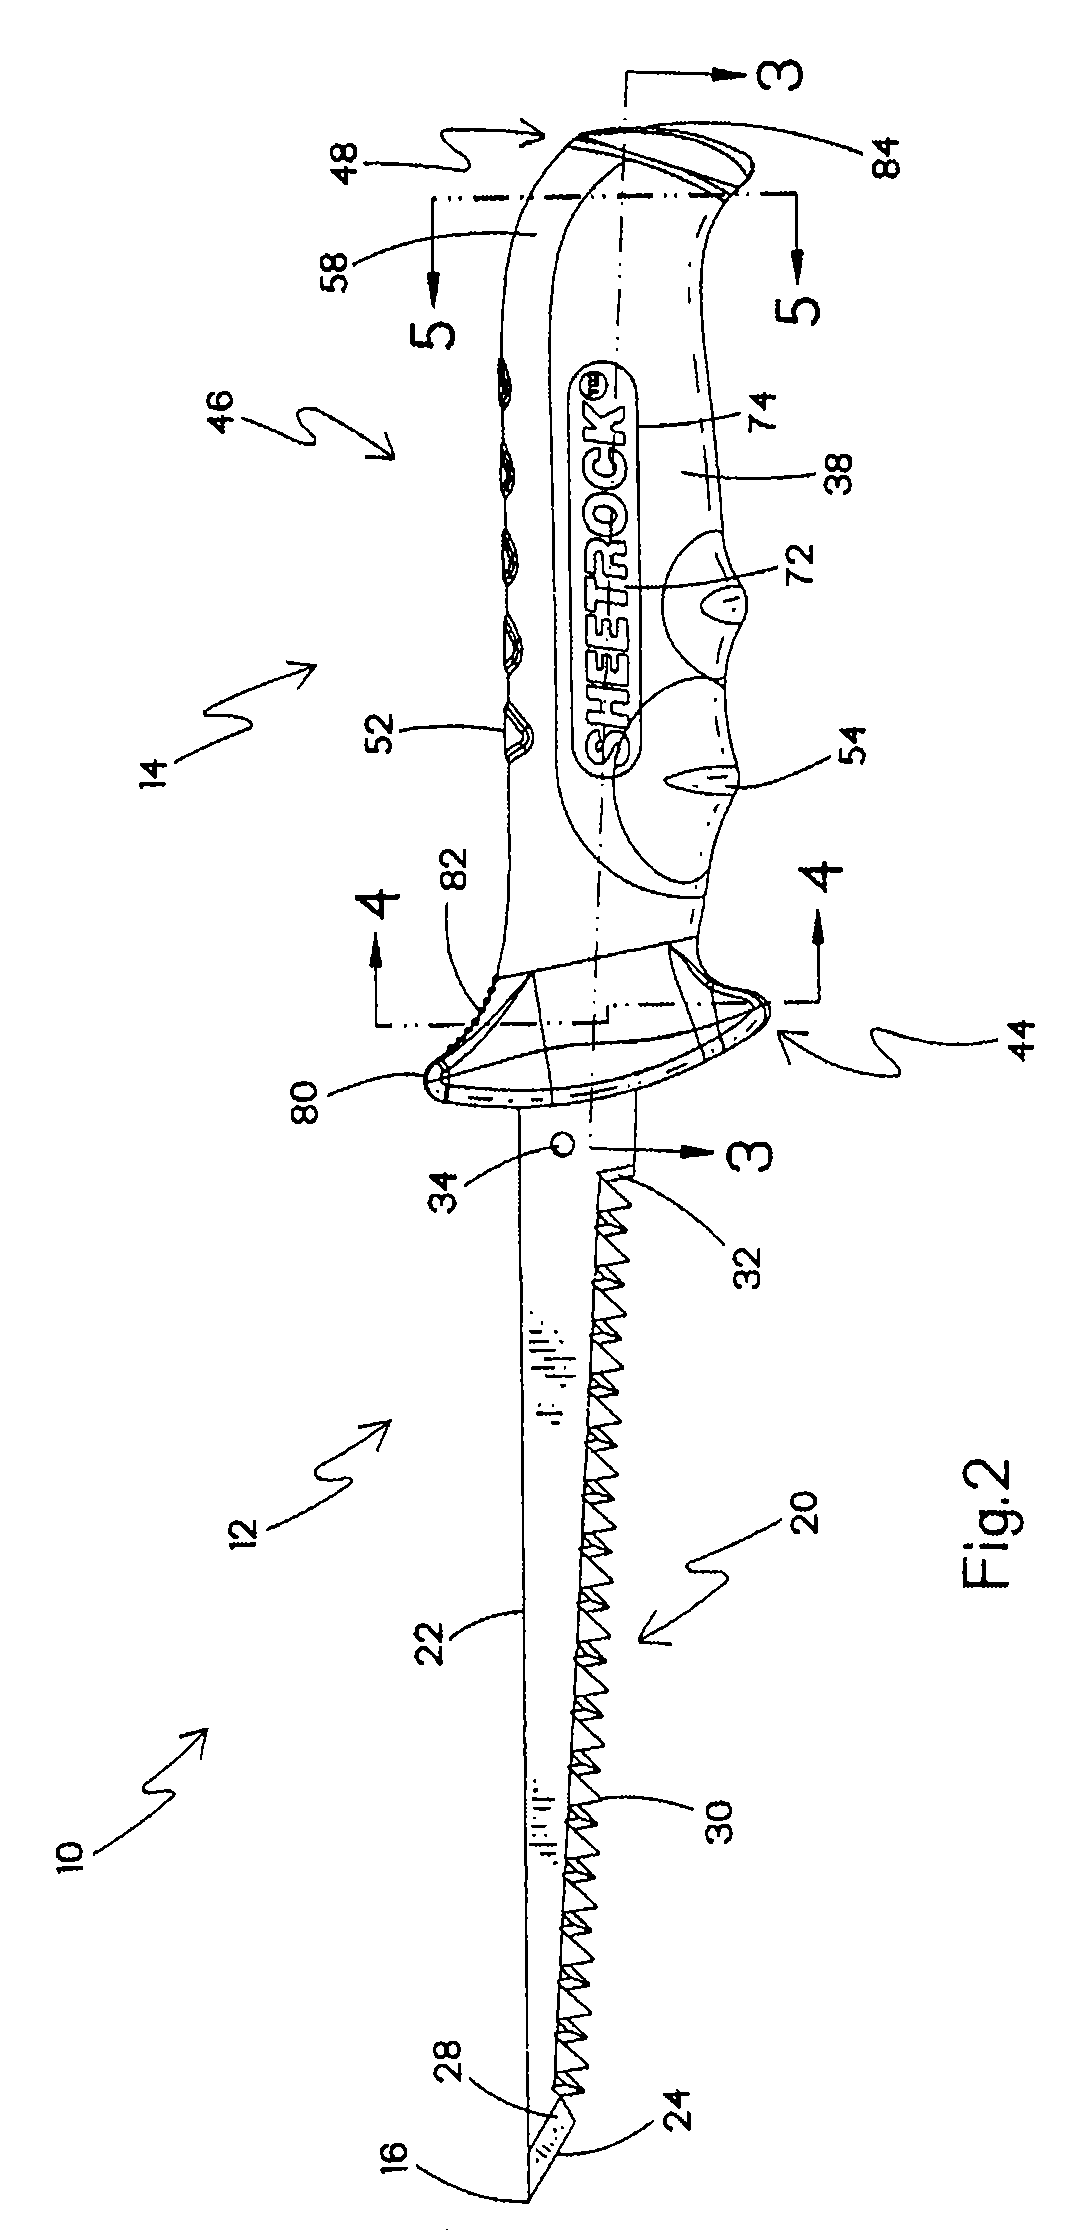 Jab saw with accessible internal fastening location